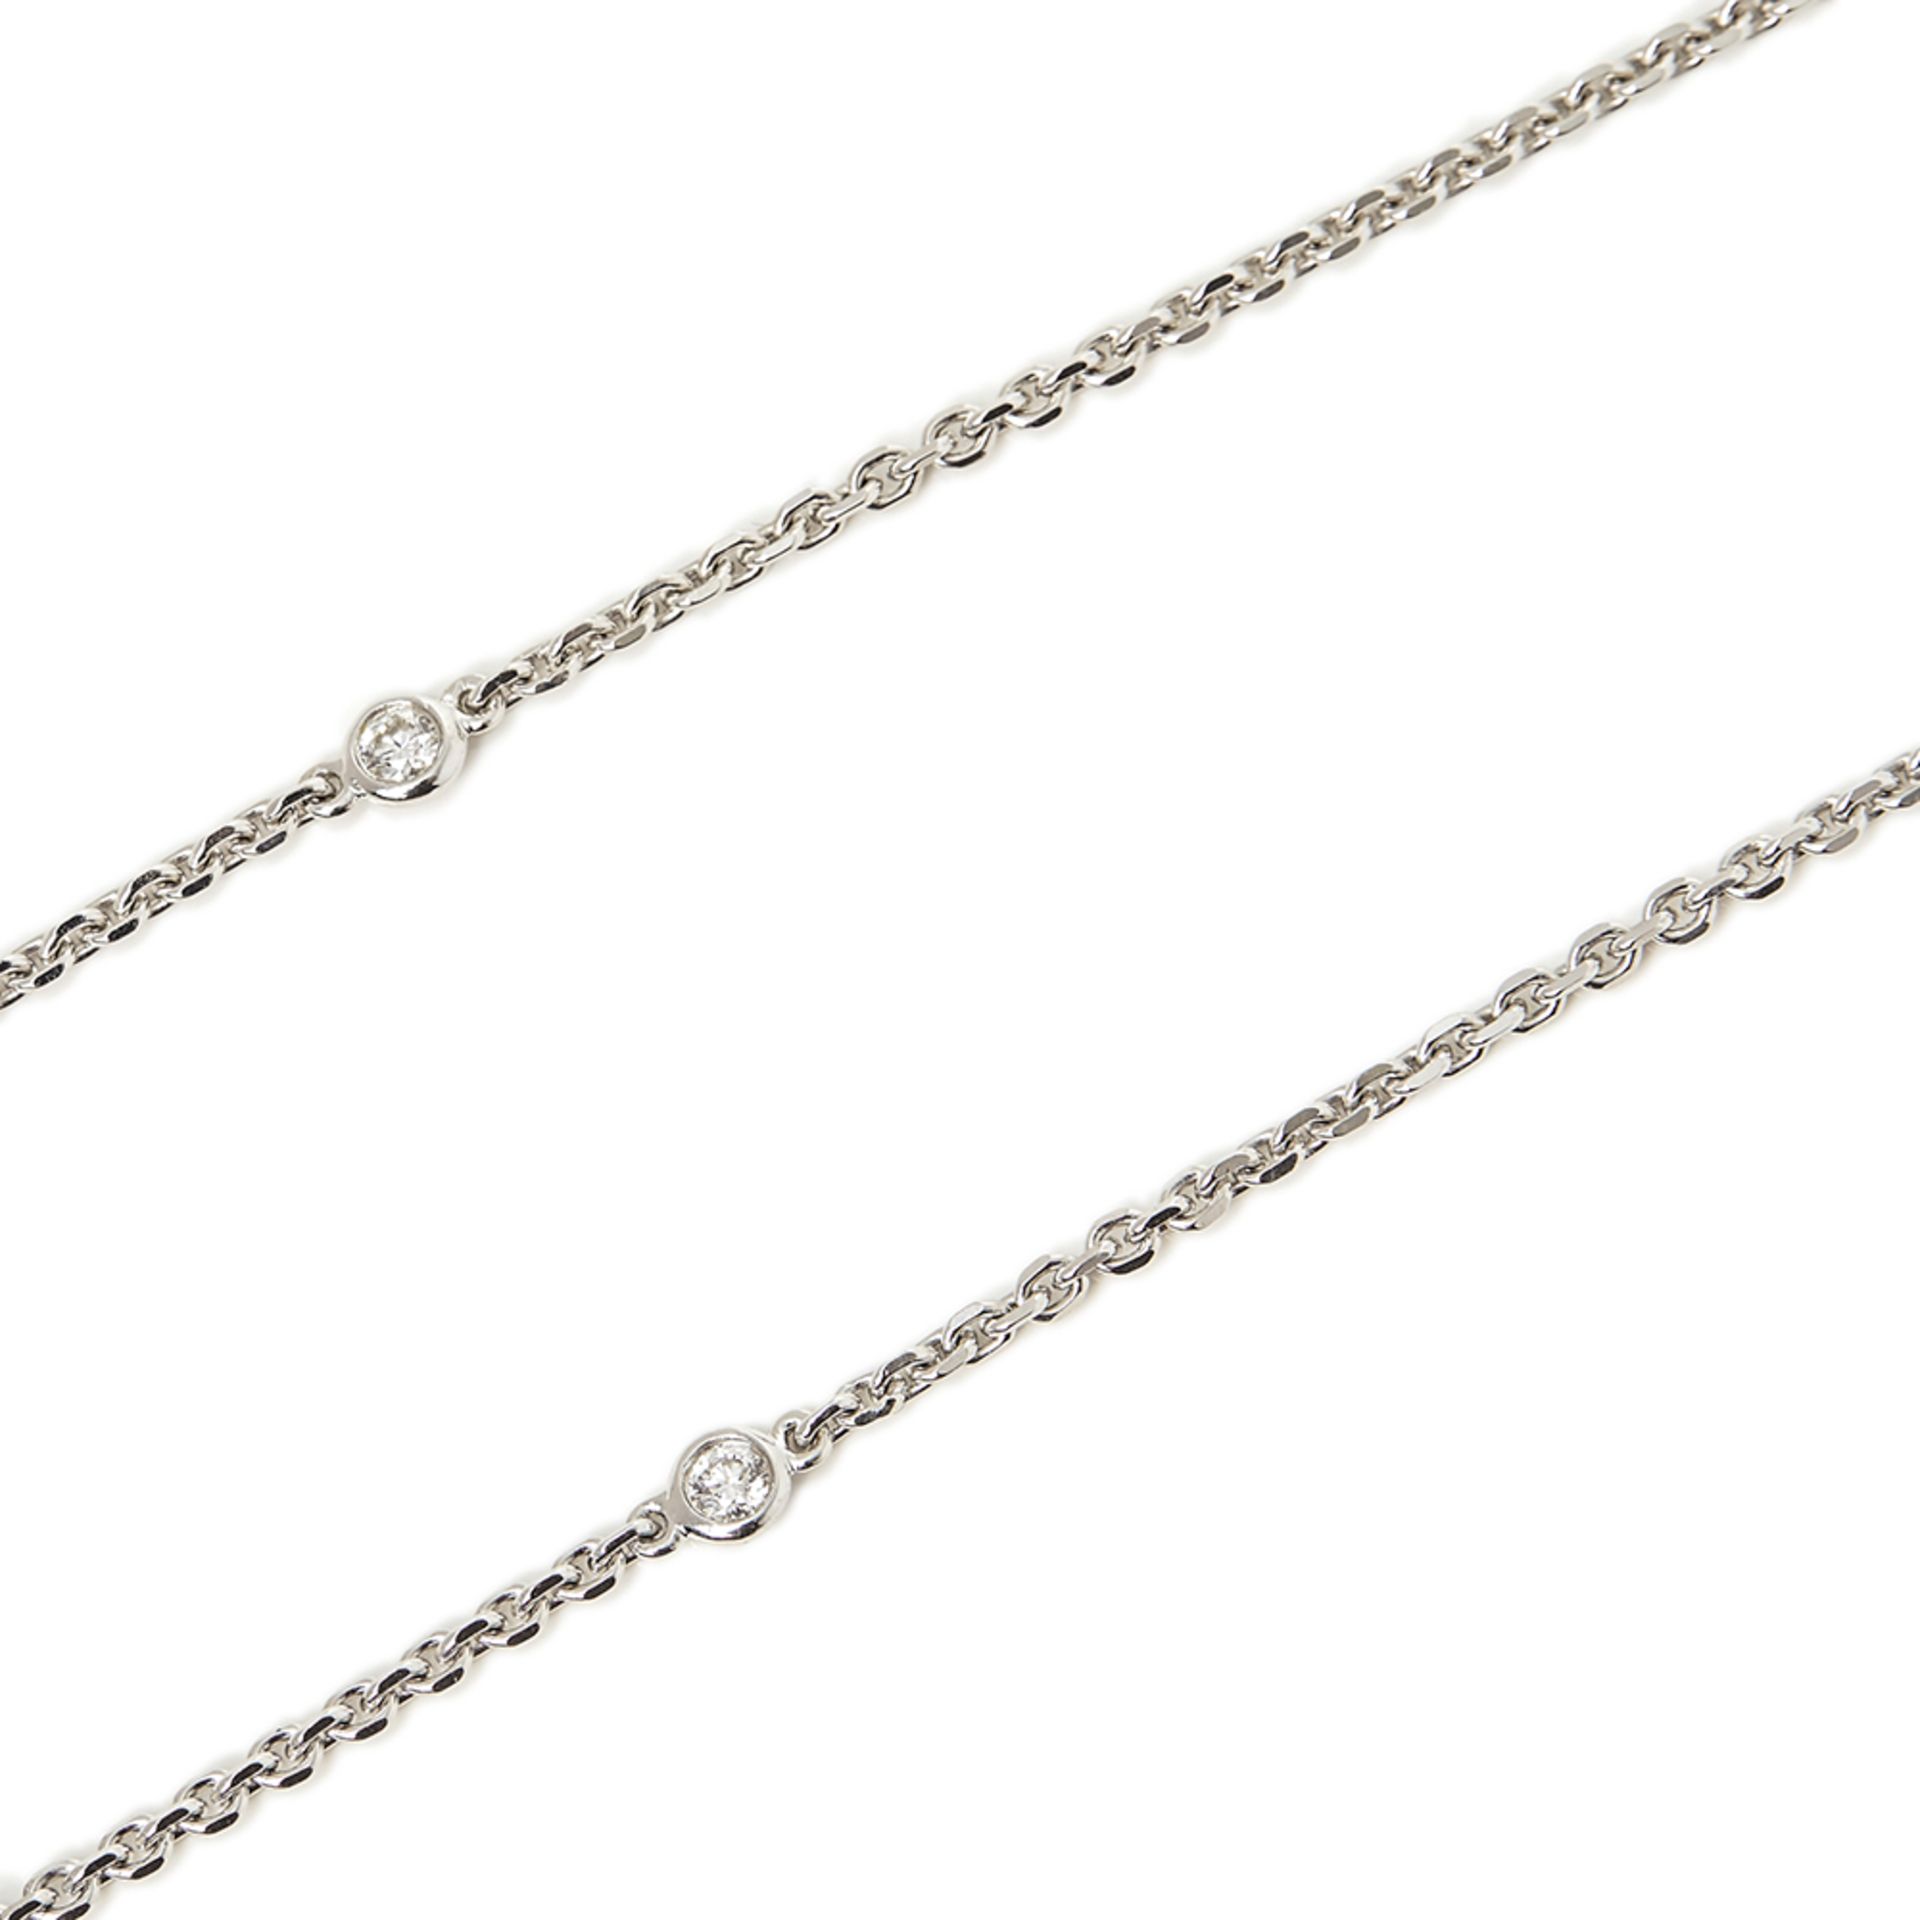 Boodles 18k White Gold Diamond Blossom Necklace - Image 5 of 9